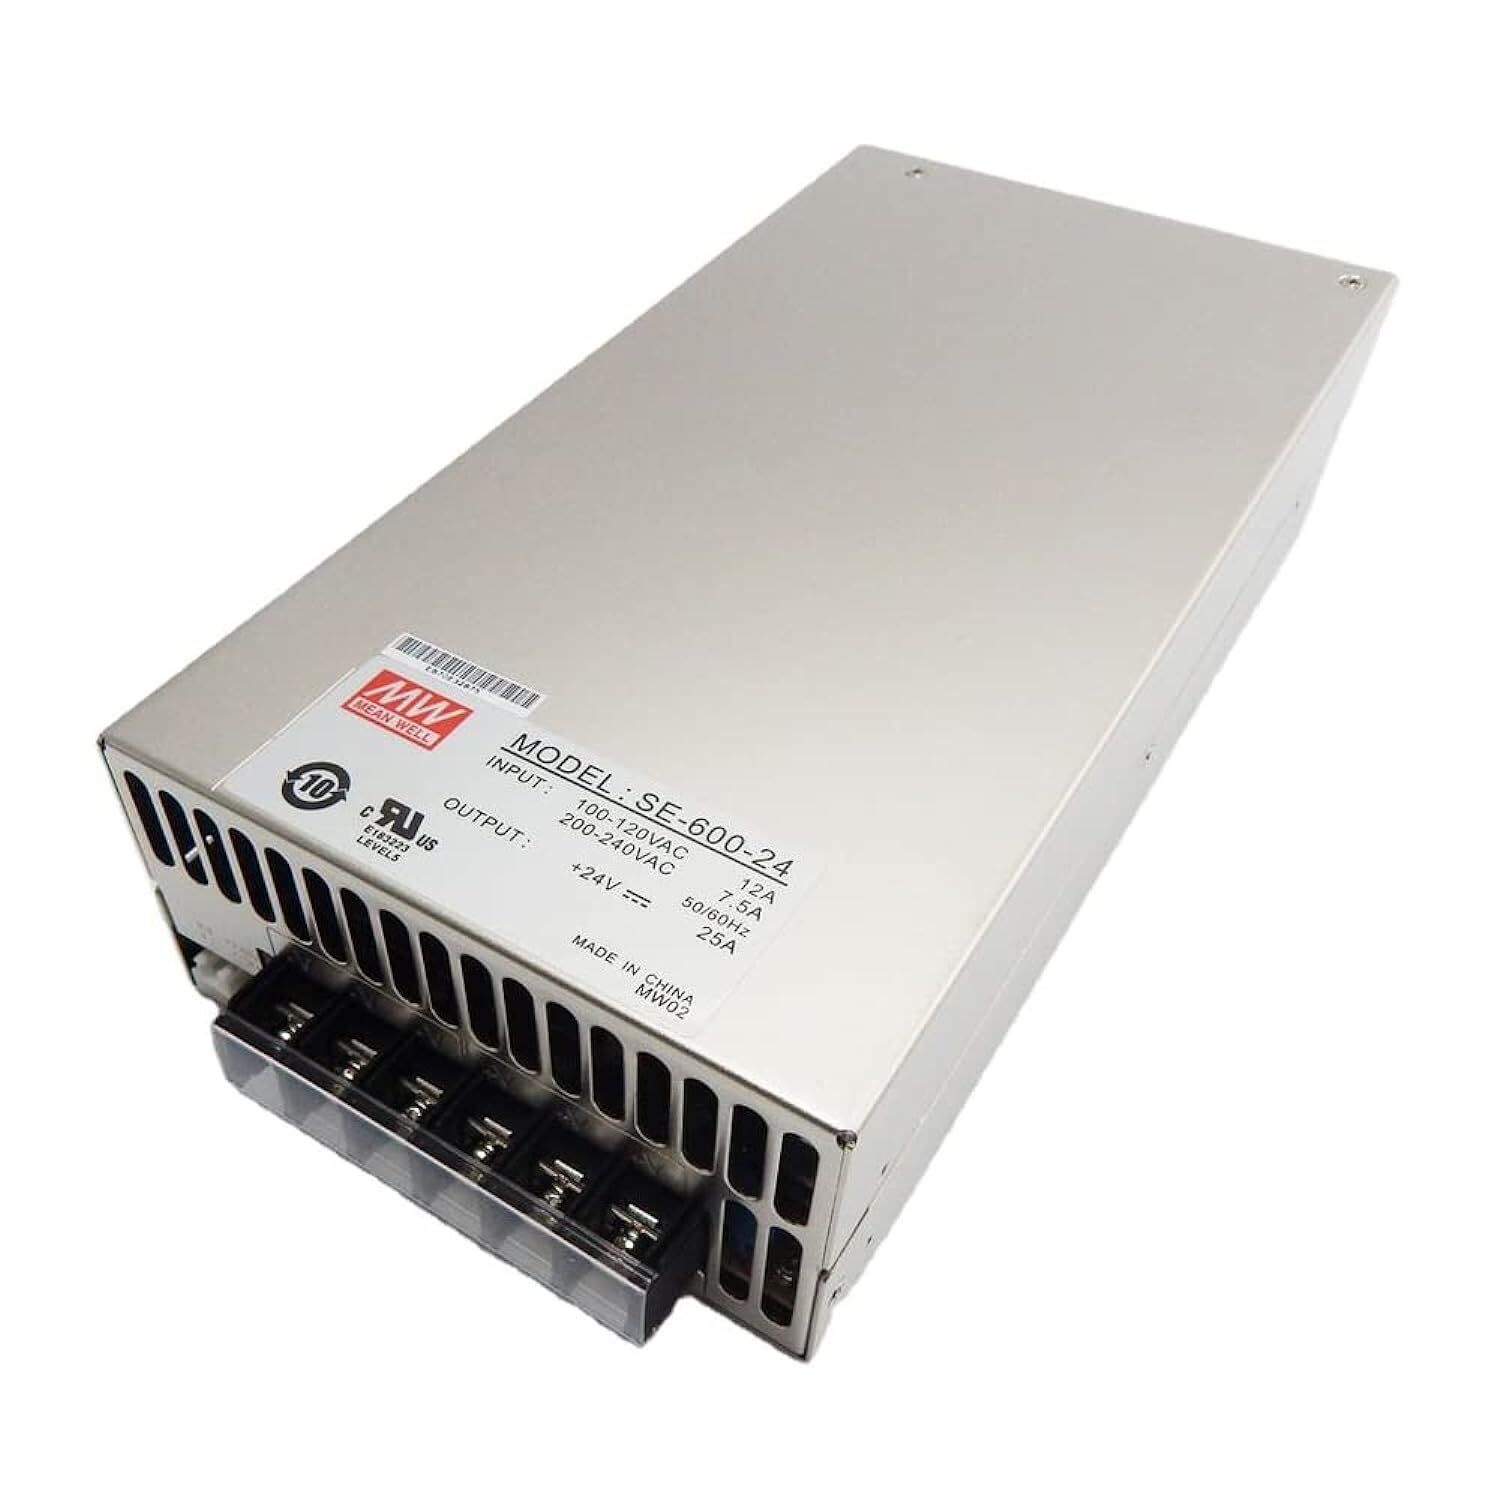 Se-600-24 Mean Well Best Price 600W 24V 25A Switching Power Supply Meanwell Se